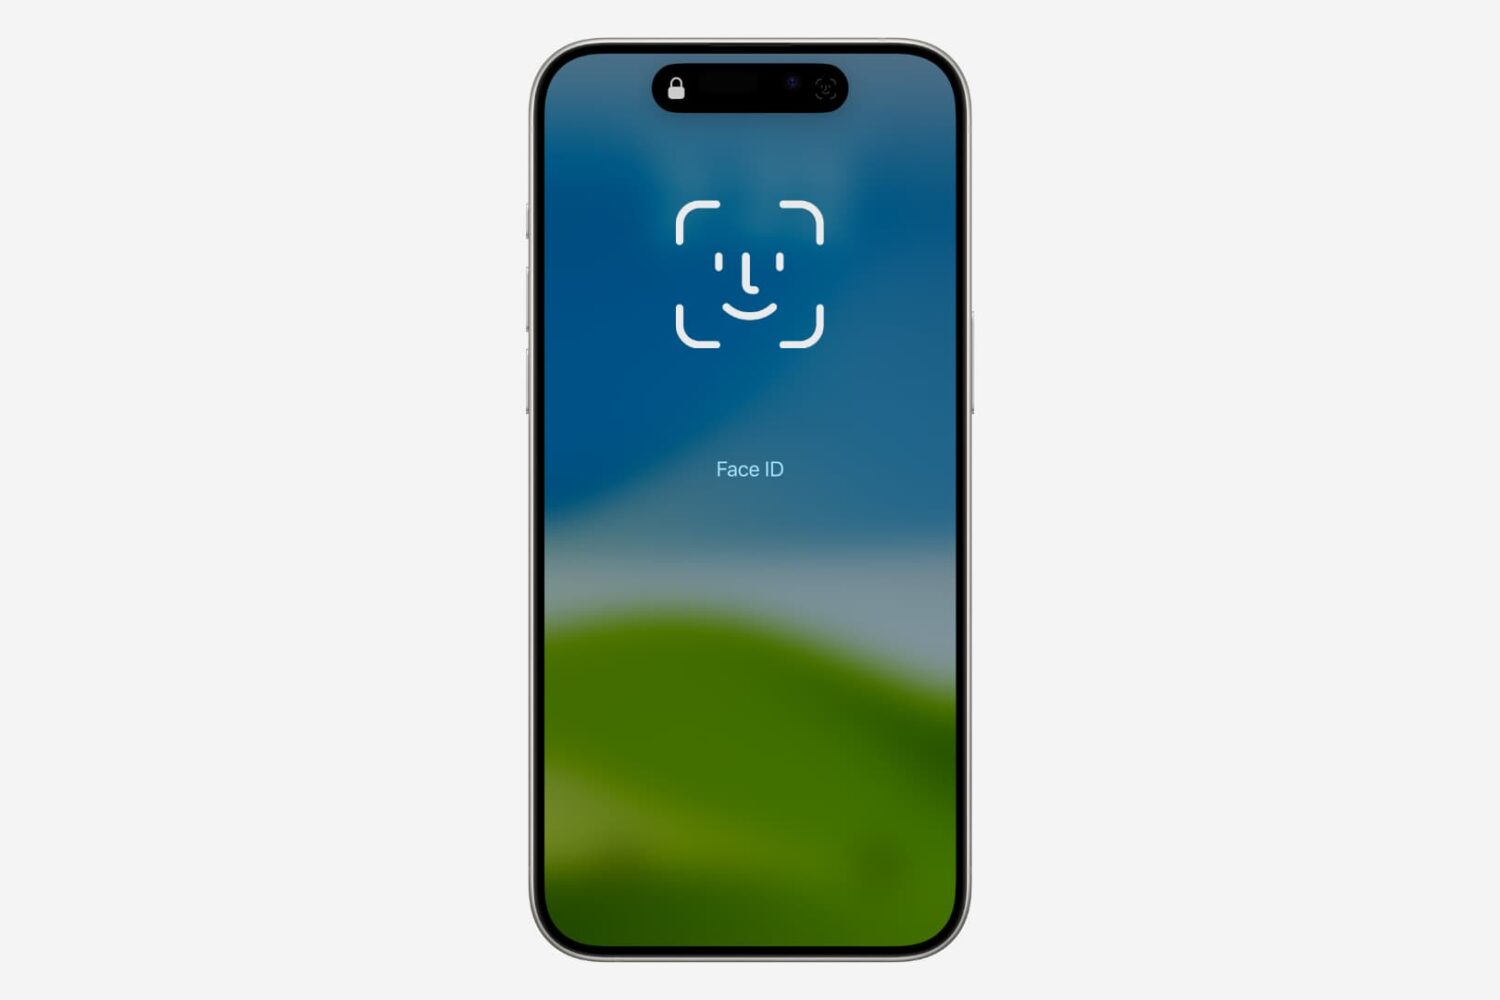 iPhone Lock Screen showing Face ID